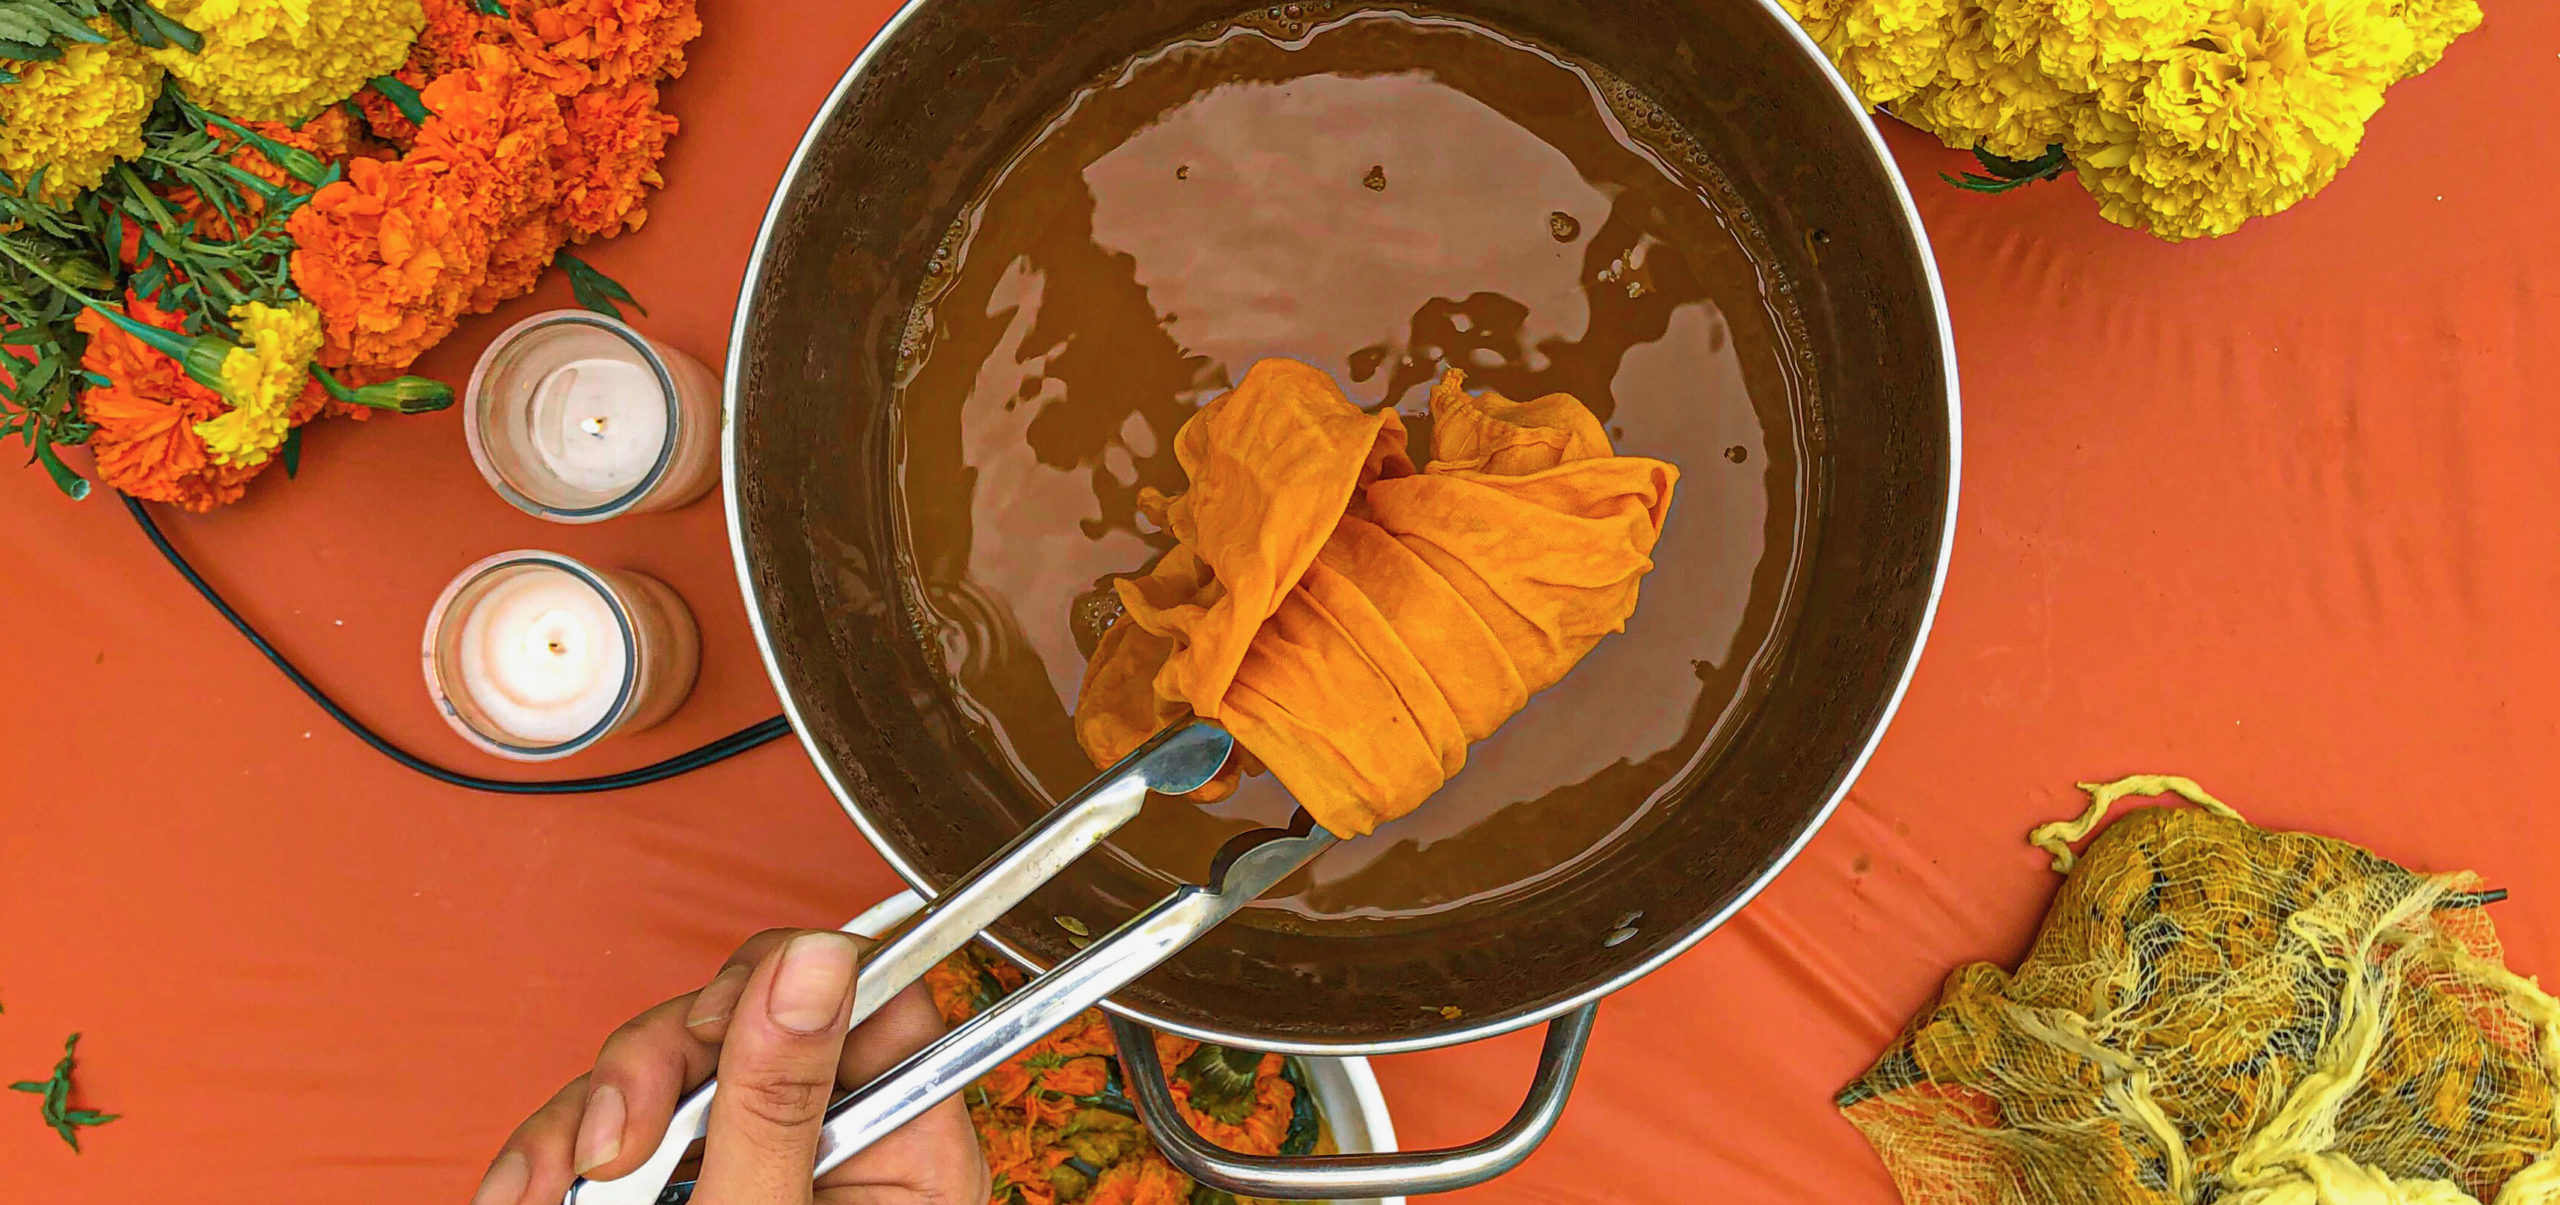 Image of someone dipping fabric into a pot of dye naturally made from marigolds.